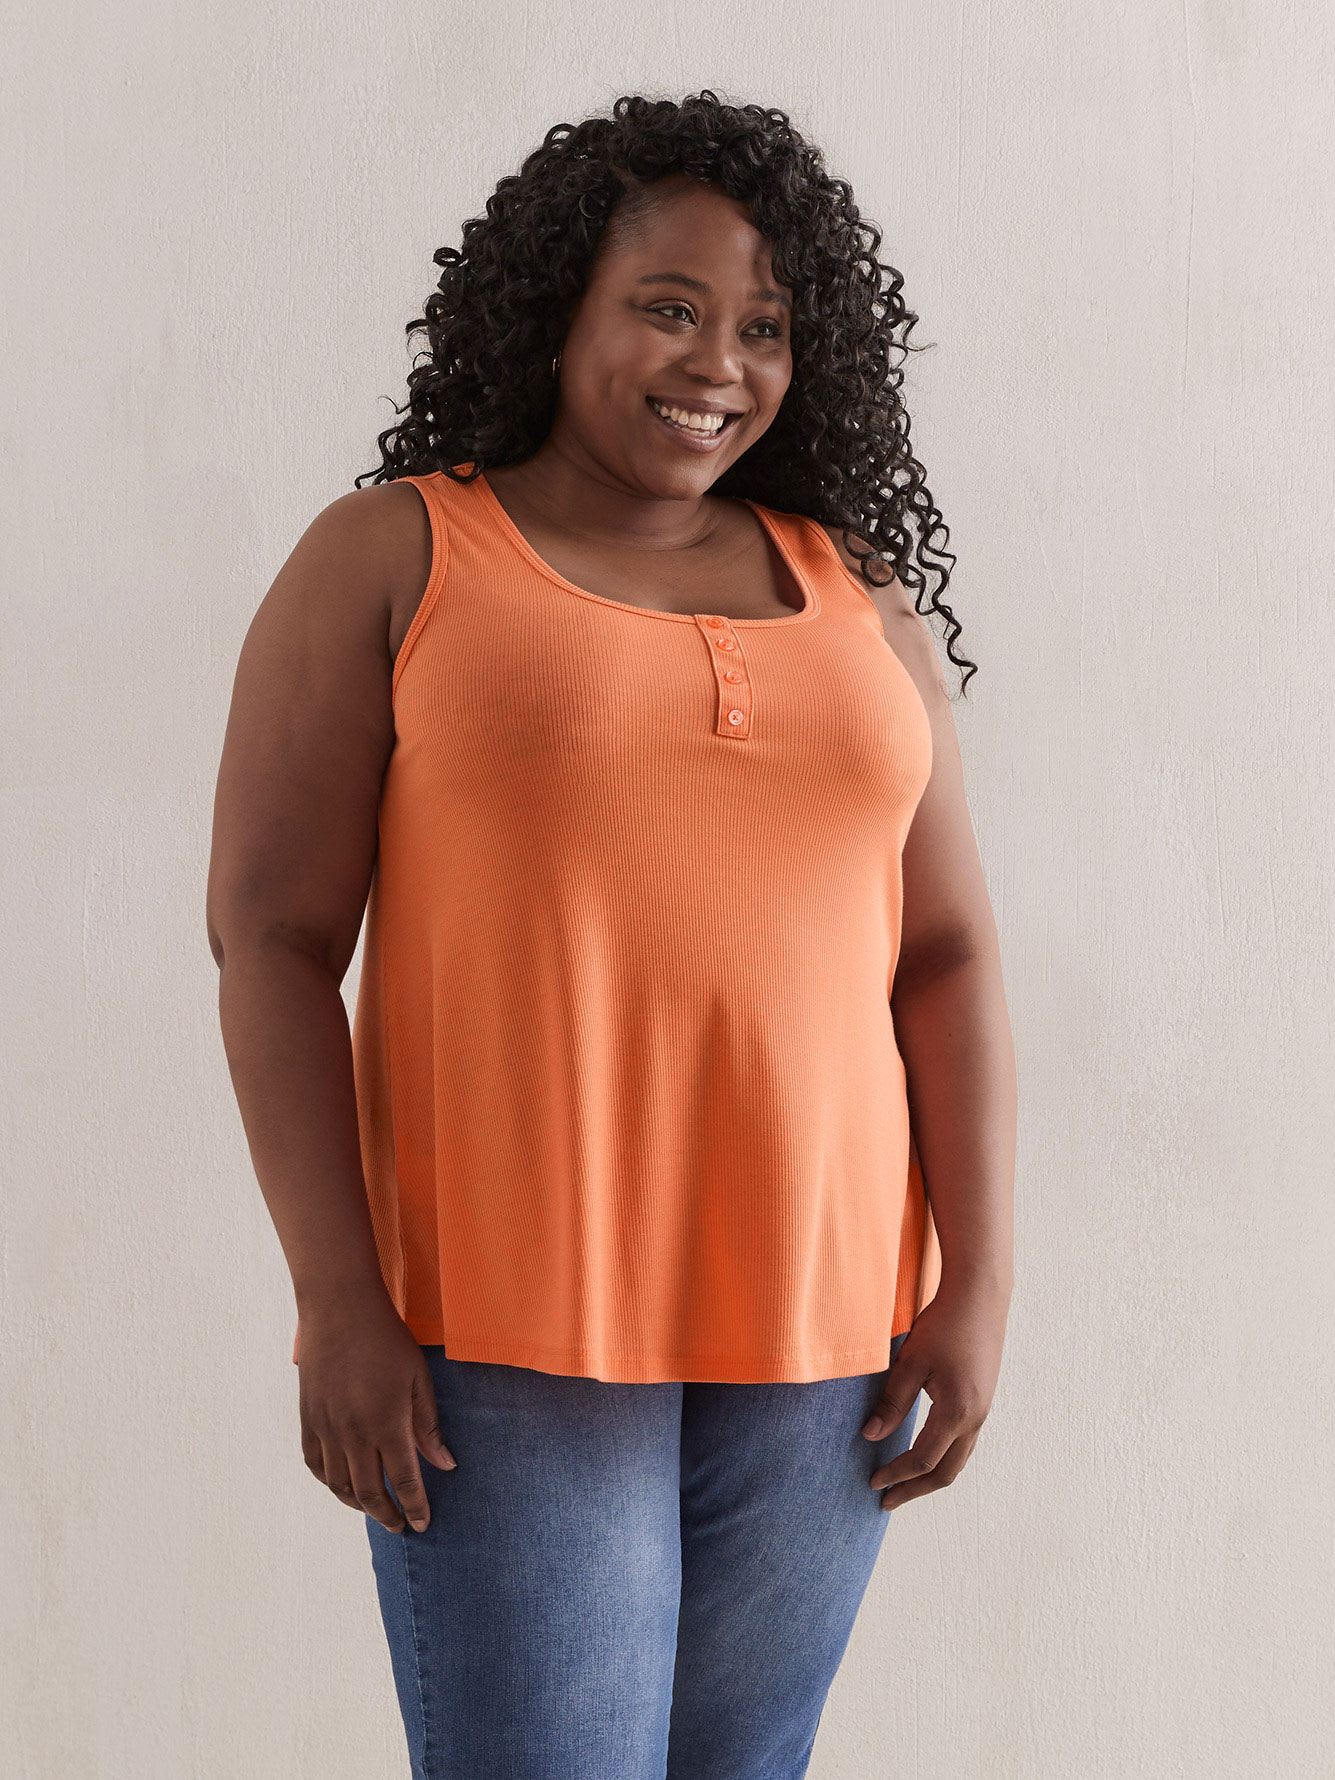 Rib Tank Top With Buttons - In Every Story